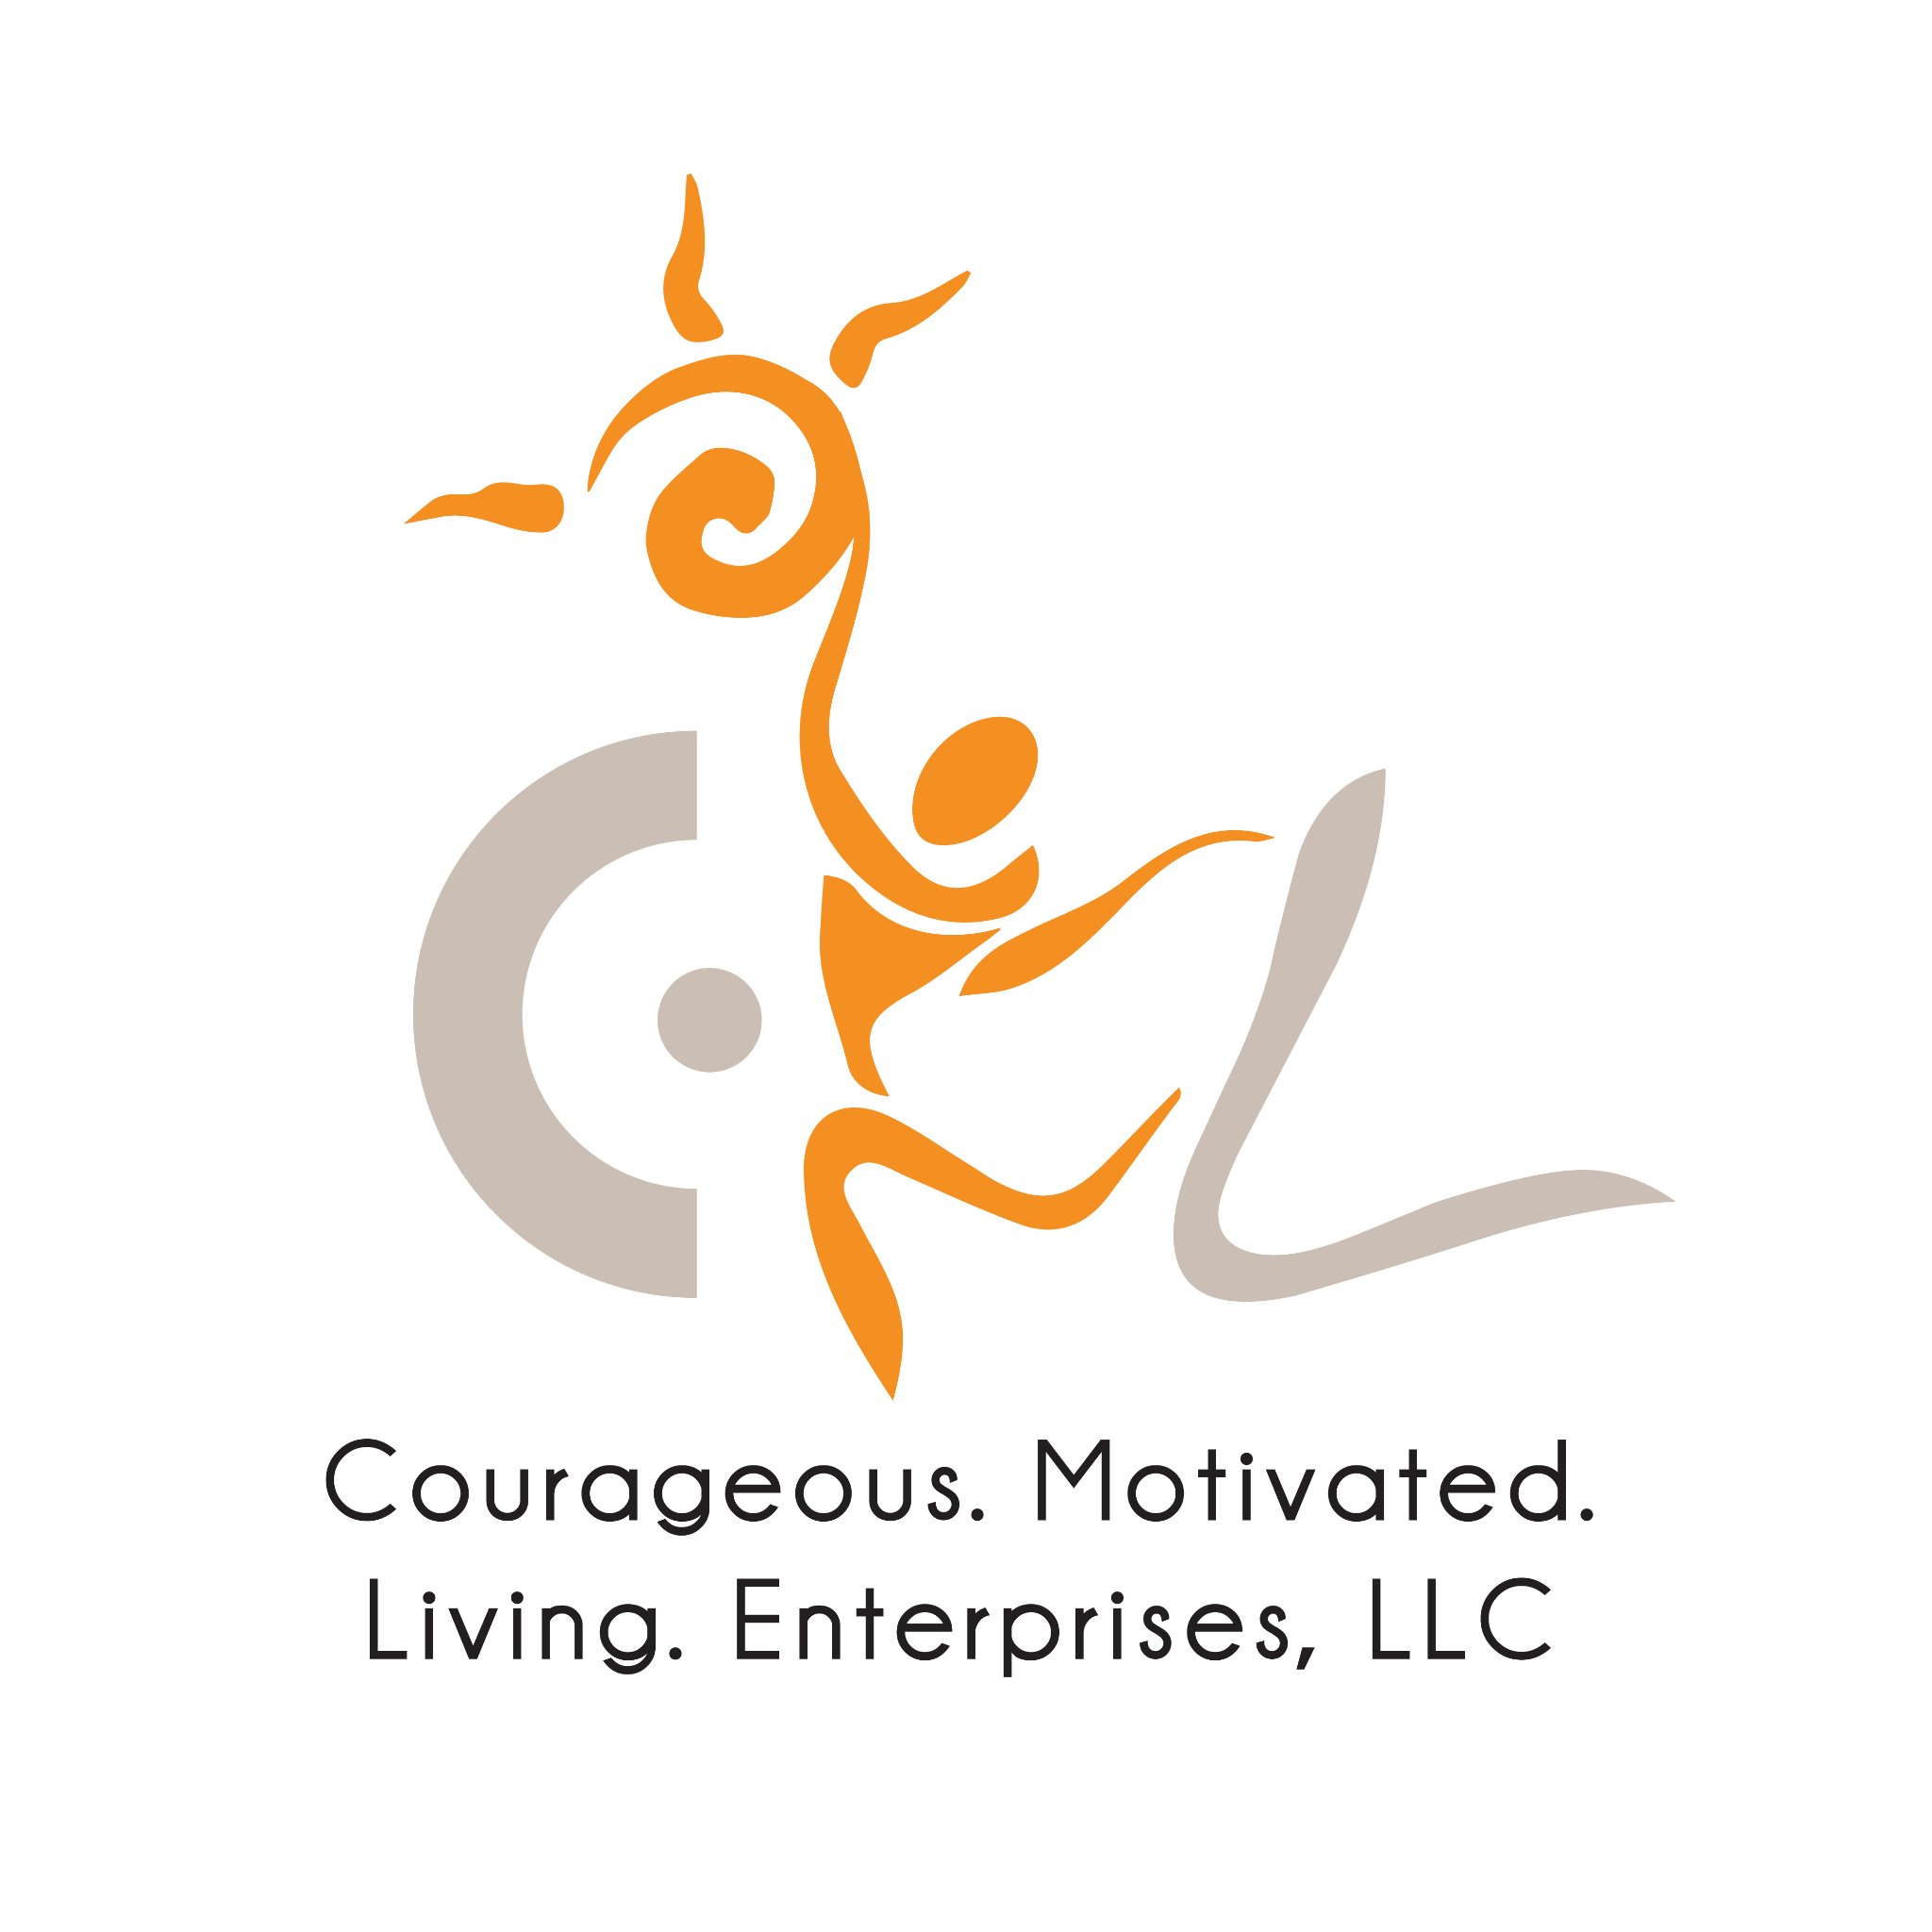 An internationally known Consulting Advocacy Agency that ignites HOPE by building COURAGE, activating MOTIVATION, & helping others LIVE life to its fullest